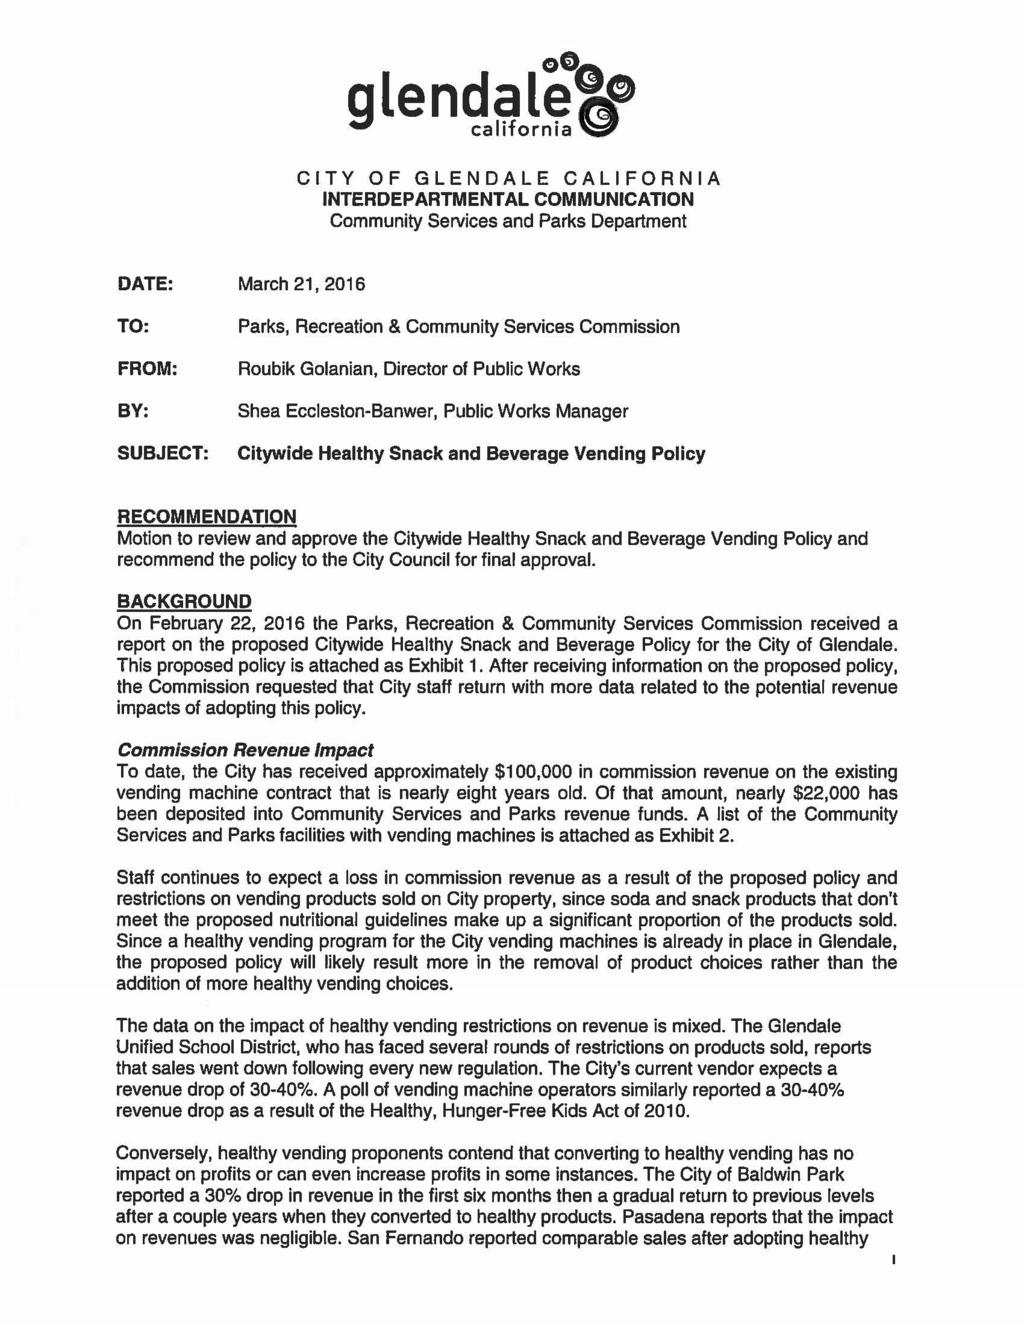 CITY OF GLENDALE CALIFORNIA INTERDEPARTMENTAL COMMUNICATION Community Services and Parks Department DATE: March 21, 2016 TO: FROM: BY: SUBJECT: Parks, Recreation & Community Services Commission